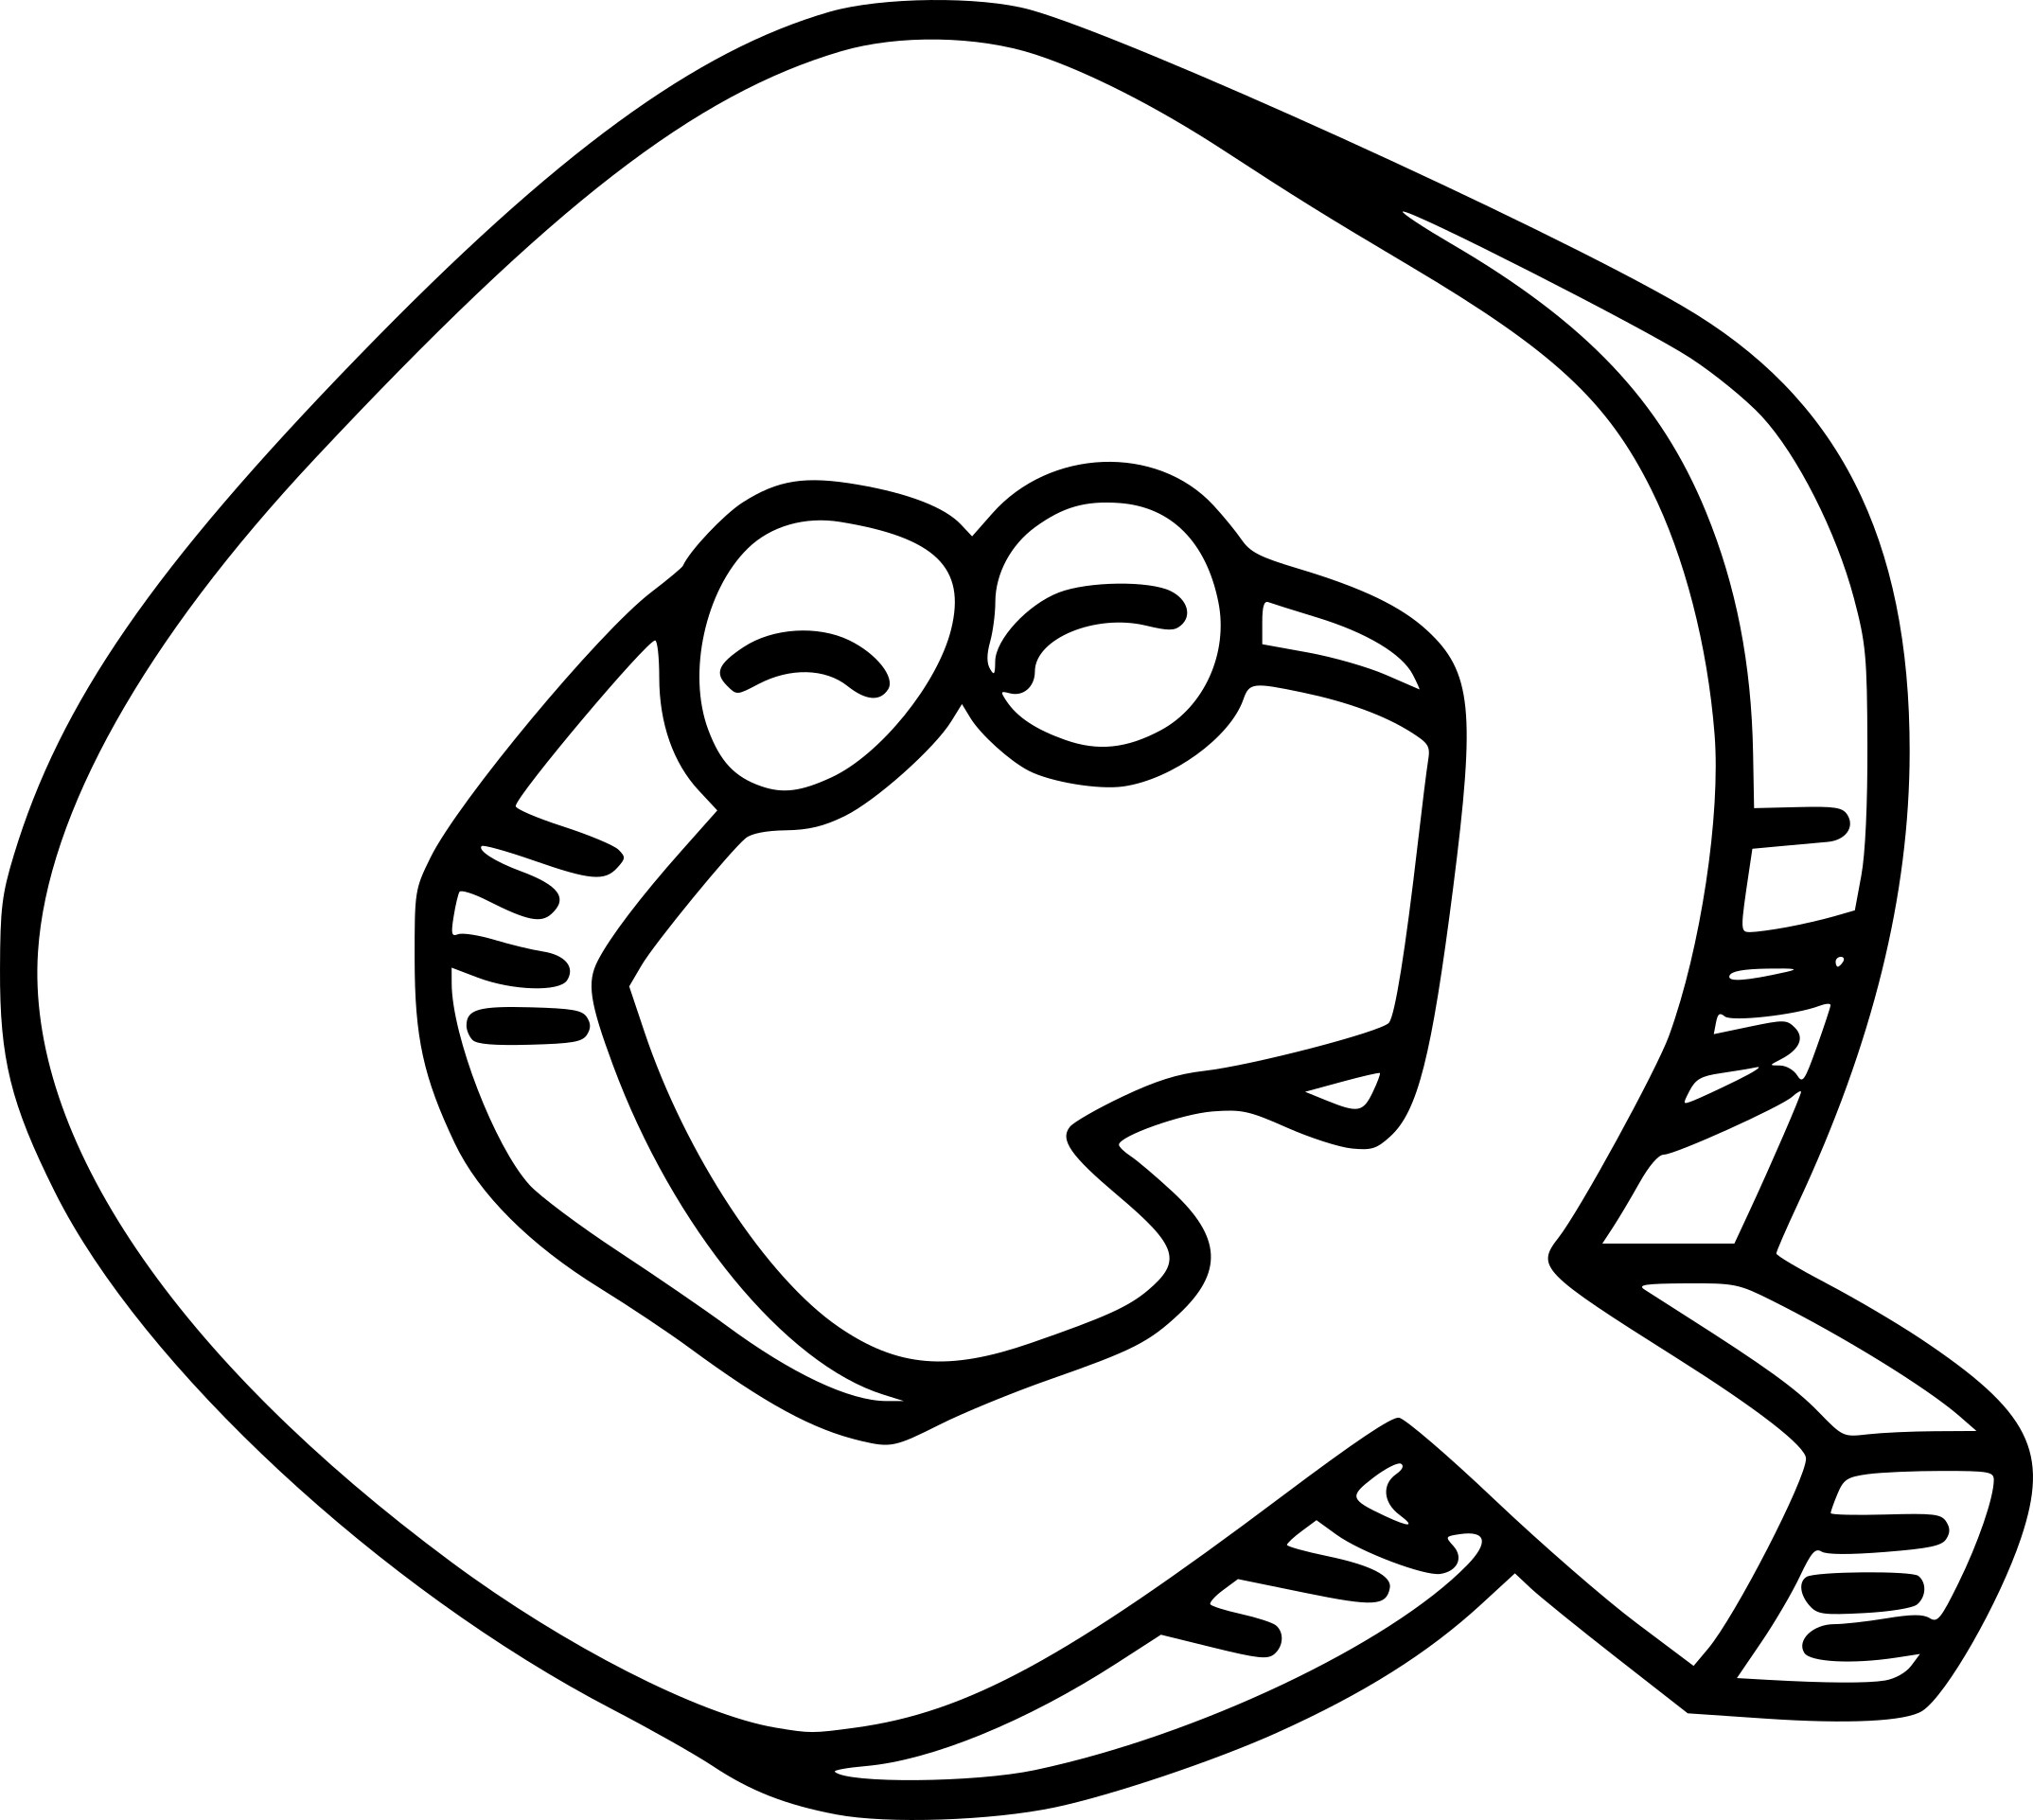 Letter Q coloring page